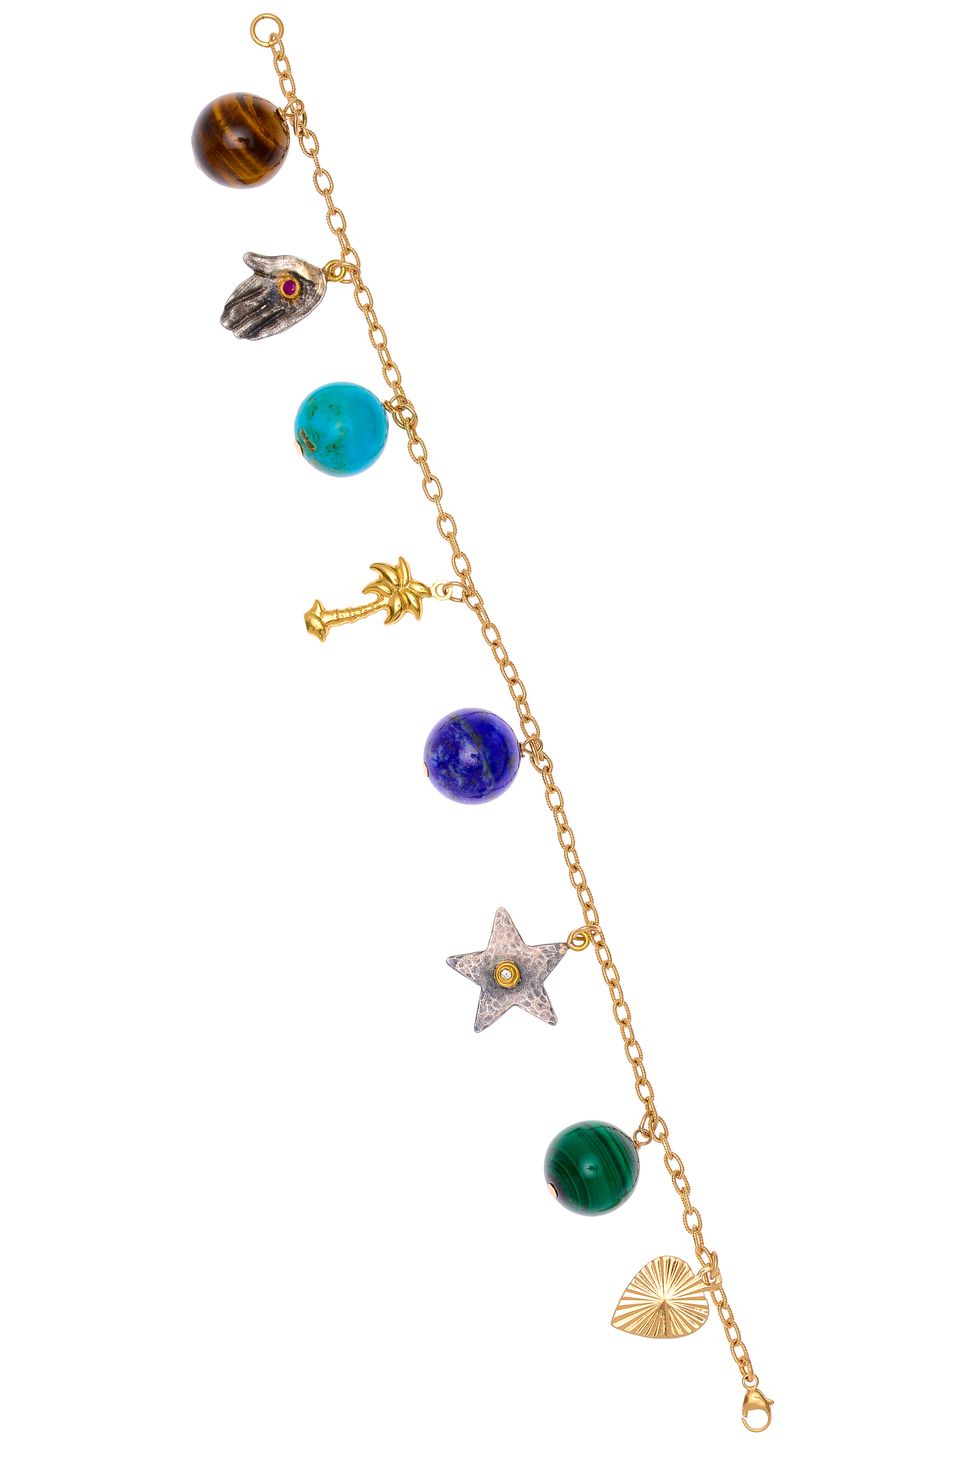 14K Yellow Gold and Sterling Silver Multi-Stone Charm Bracelet